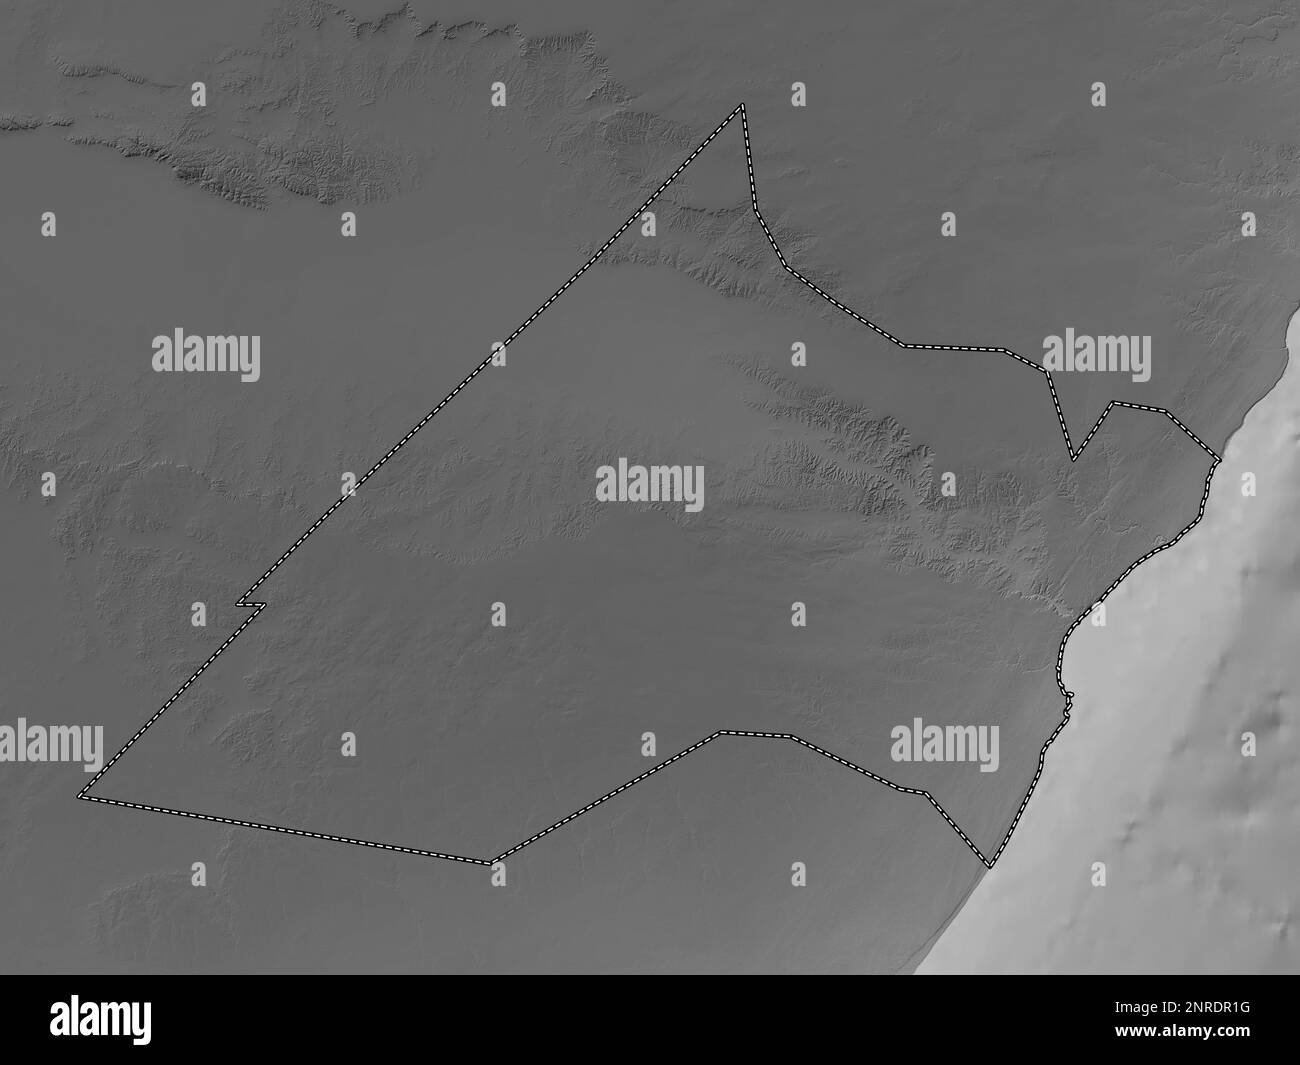 Nugaal, region of Somalia. Grayscale elevation map with lakes and rivers Stock Photo